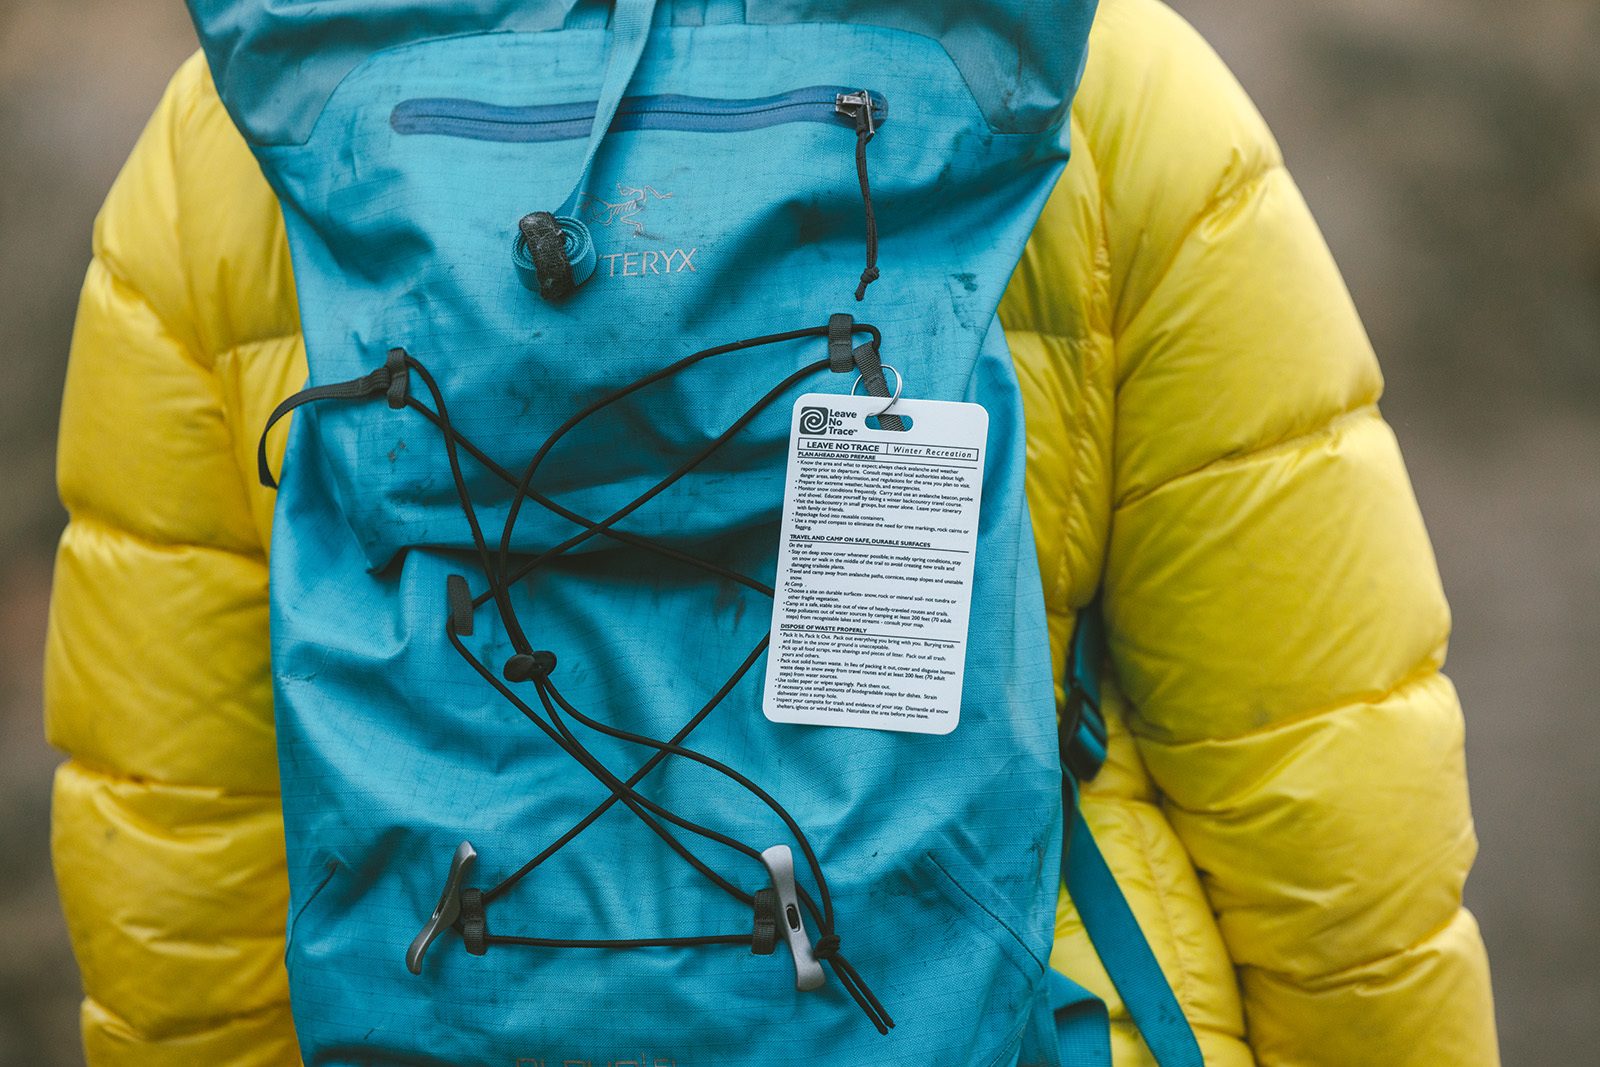 Leave No Trace placard on a backpack